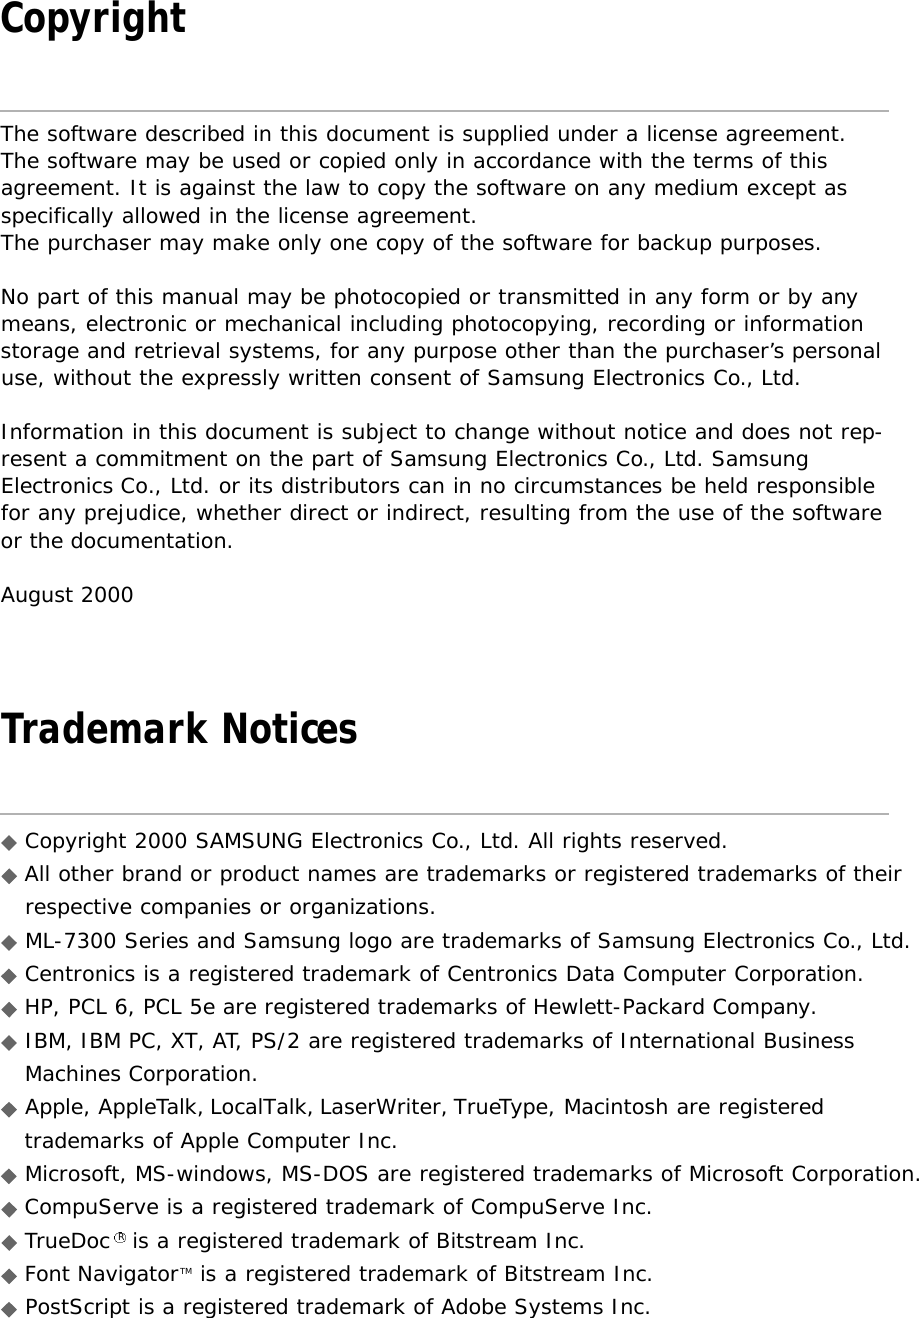 CopyrightThe software described in this document is supplied under a license agreement. The software may be used or copied only in accordance with the terms of thisagreement. It is against the law to copy the software on any medium except asspecifically allowed in the license agreement. The purchaser may make only one copy of the software for backup purposes.No part of this manual may be photocopied or transmitted in any form or by anymeans, electronic or mechanical including photocopying, recording or informationstorage and retrieval systems, for any purpose other than the purchaser’s personaluse, without the expressly written consent of Samsung Electronics Co., Ltd.Information in this document is subject to change without notice and does not rep-resent a commitment on the part of Samsung Electronics Co., Ltd. SamsungElectronics Co., Ltd. or its distributors can in no circumstances be held responsiblefor any prejudice, whether direct or indirect, resulting from the use of the softwareor the documentation.August 2000Trademark NoticesCopyright 2000 SAMSUNG Electronics Co., Ltd. All rights reserved.All other brand or product names are trademarks or registered trademarks of theirrespective companies or organizations.ML-7300 Series and Samsung logo are trademarks of Samsung Electronics Co., Ltd.Centronics is a registered trademark of Centronics Data Computer Corporation.HP, PCL 6, PCL 5e are registered trademarks of Hewlett-Packard Company.IBM, IBM PC, XT, AT, PS/2 are registered trademarks of International BusinessMachines Corporation.Apple, AppleTalk, LocalTalk, LaserWriter, TrueType, Macintosh are registeredtrademarks of Apple Computer Inc.Microsoft, MS-windows, MS-DOS are registered trademarks of Microsoft Corporation.CompuServe is a registered trademark of CompuServe Inc.TrueDoc Ris a registered trademark of Bitstream Inc.Font NavigatorTM is a registered trademark of Bitstream Inc.PostScript is a registered trademark of Adobe Systems Inc.